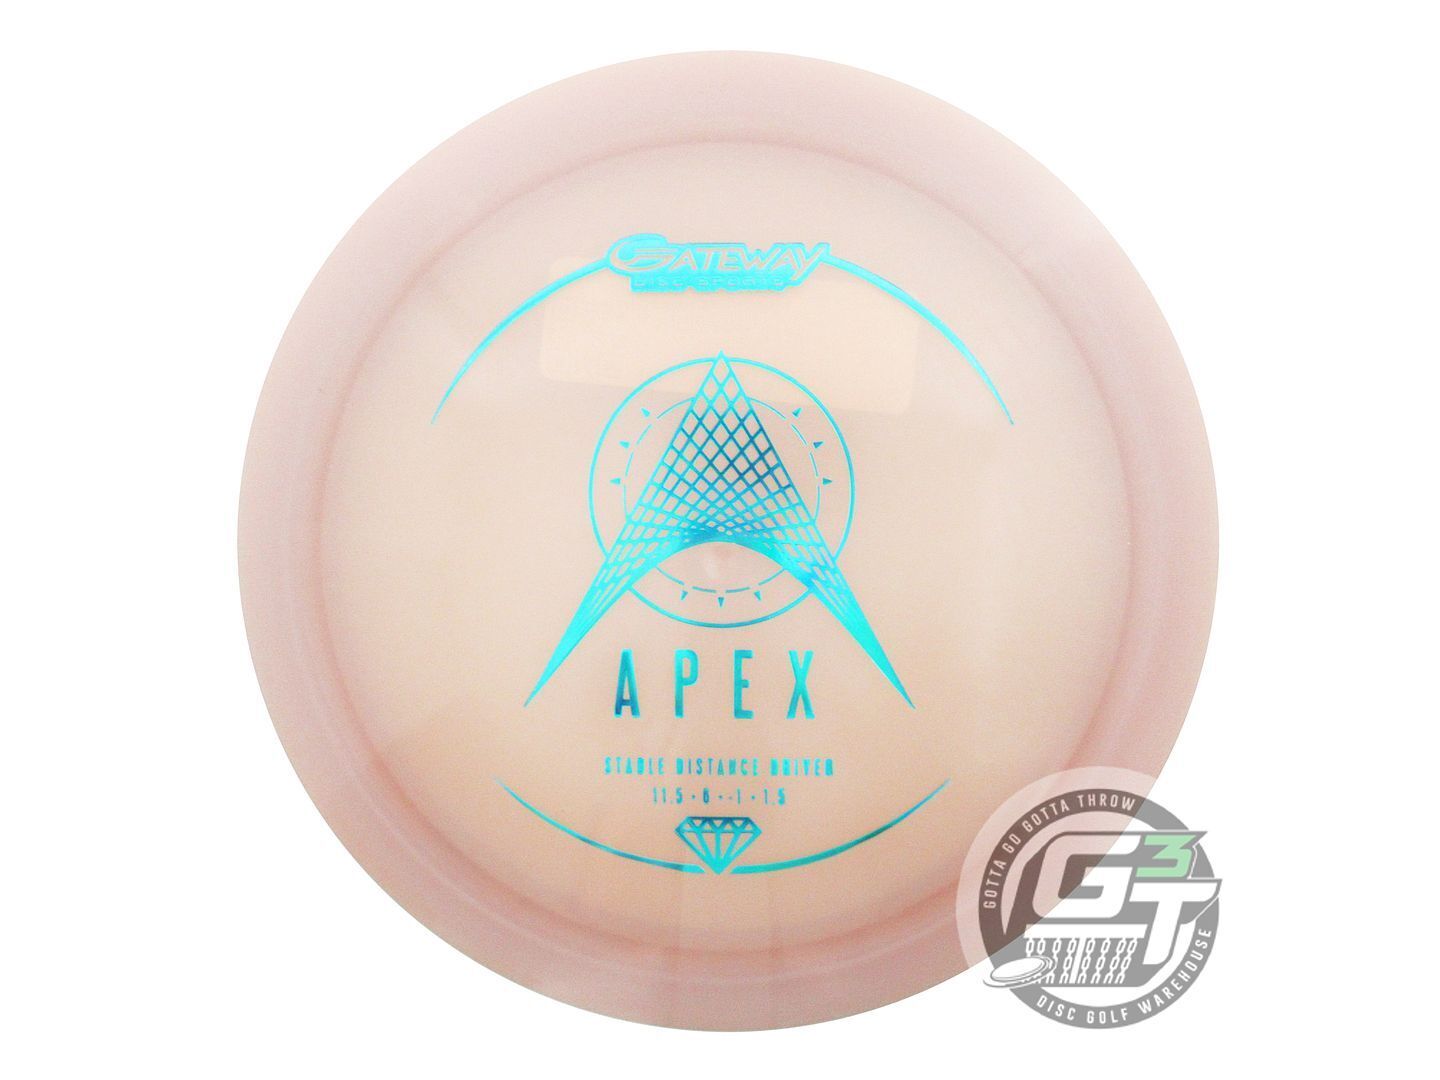 Gateway Diamond Apex Distance Driver Golf Disc (Individually Listed)